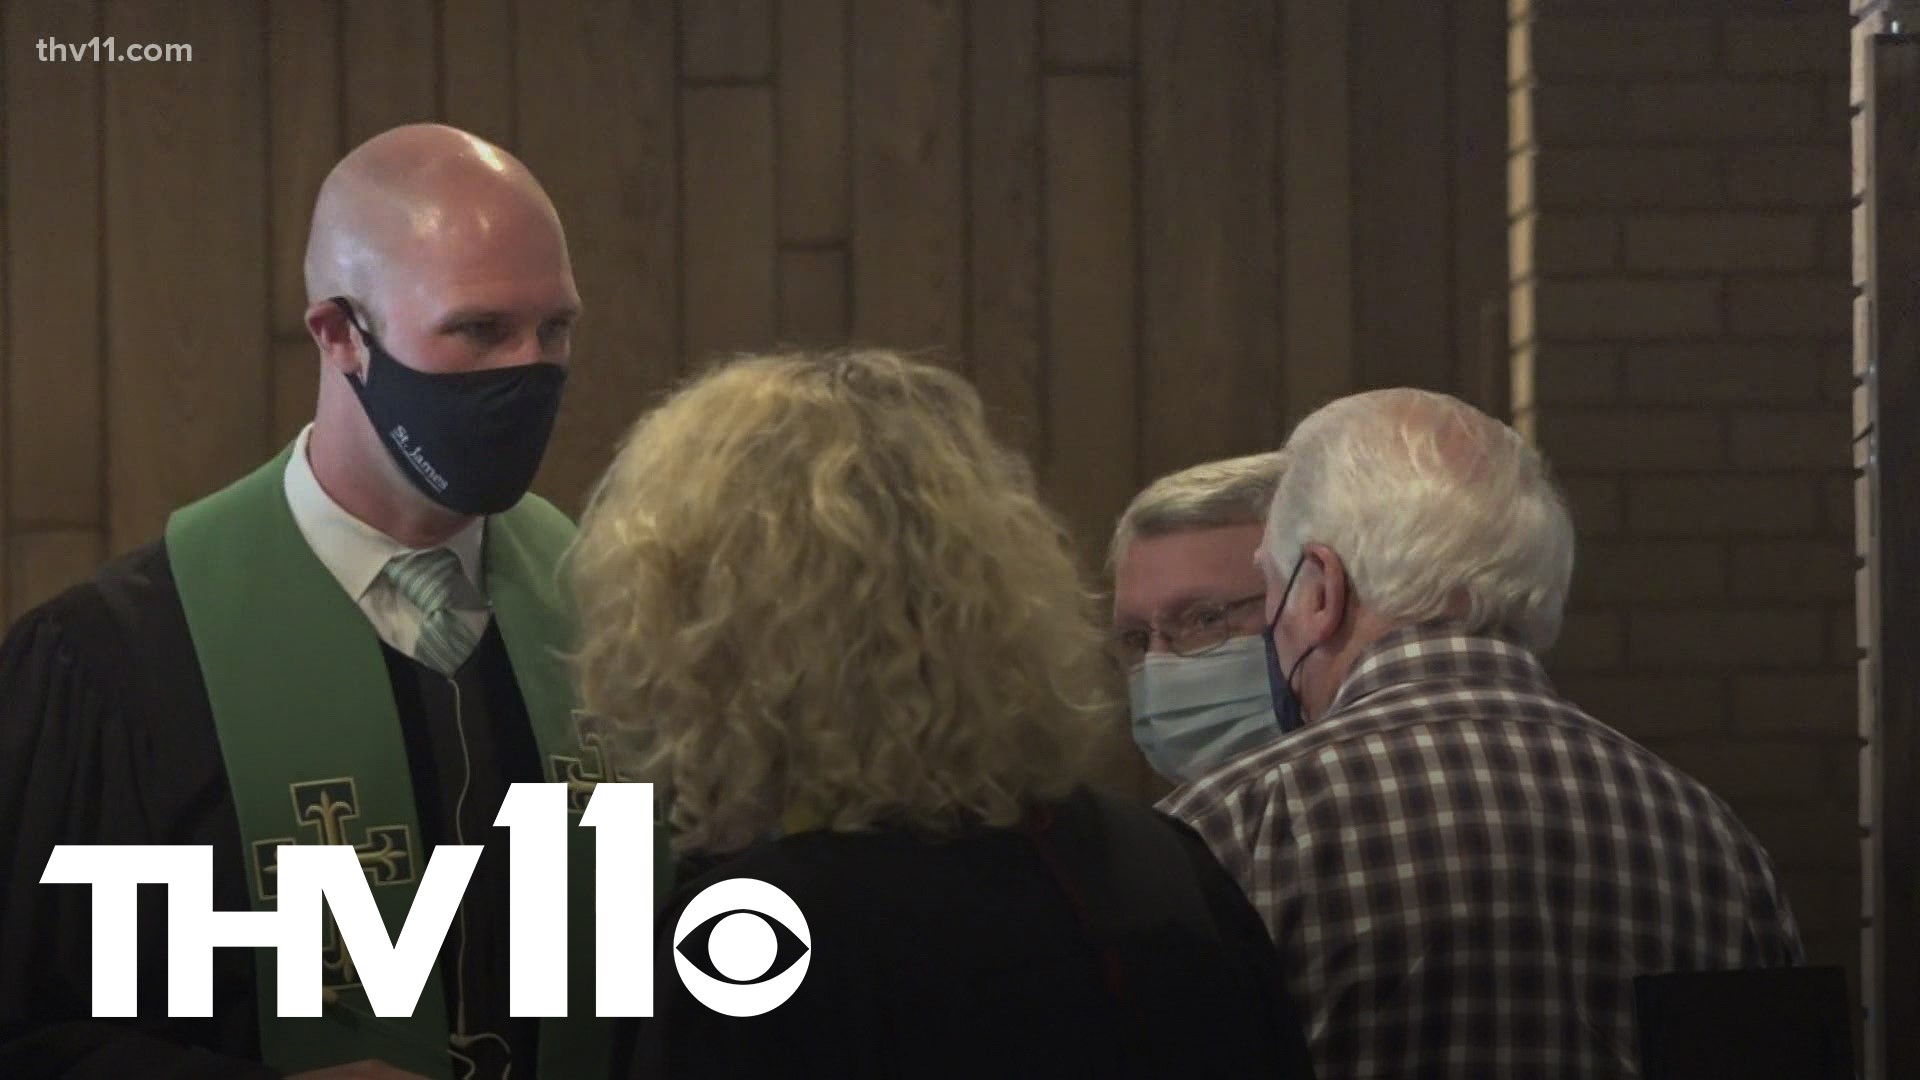 As cases continue to rise rapidly throughout Arkansas, some churches are seeing a return to COVID regulations such as mask requirement and social distancing.